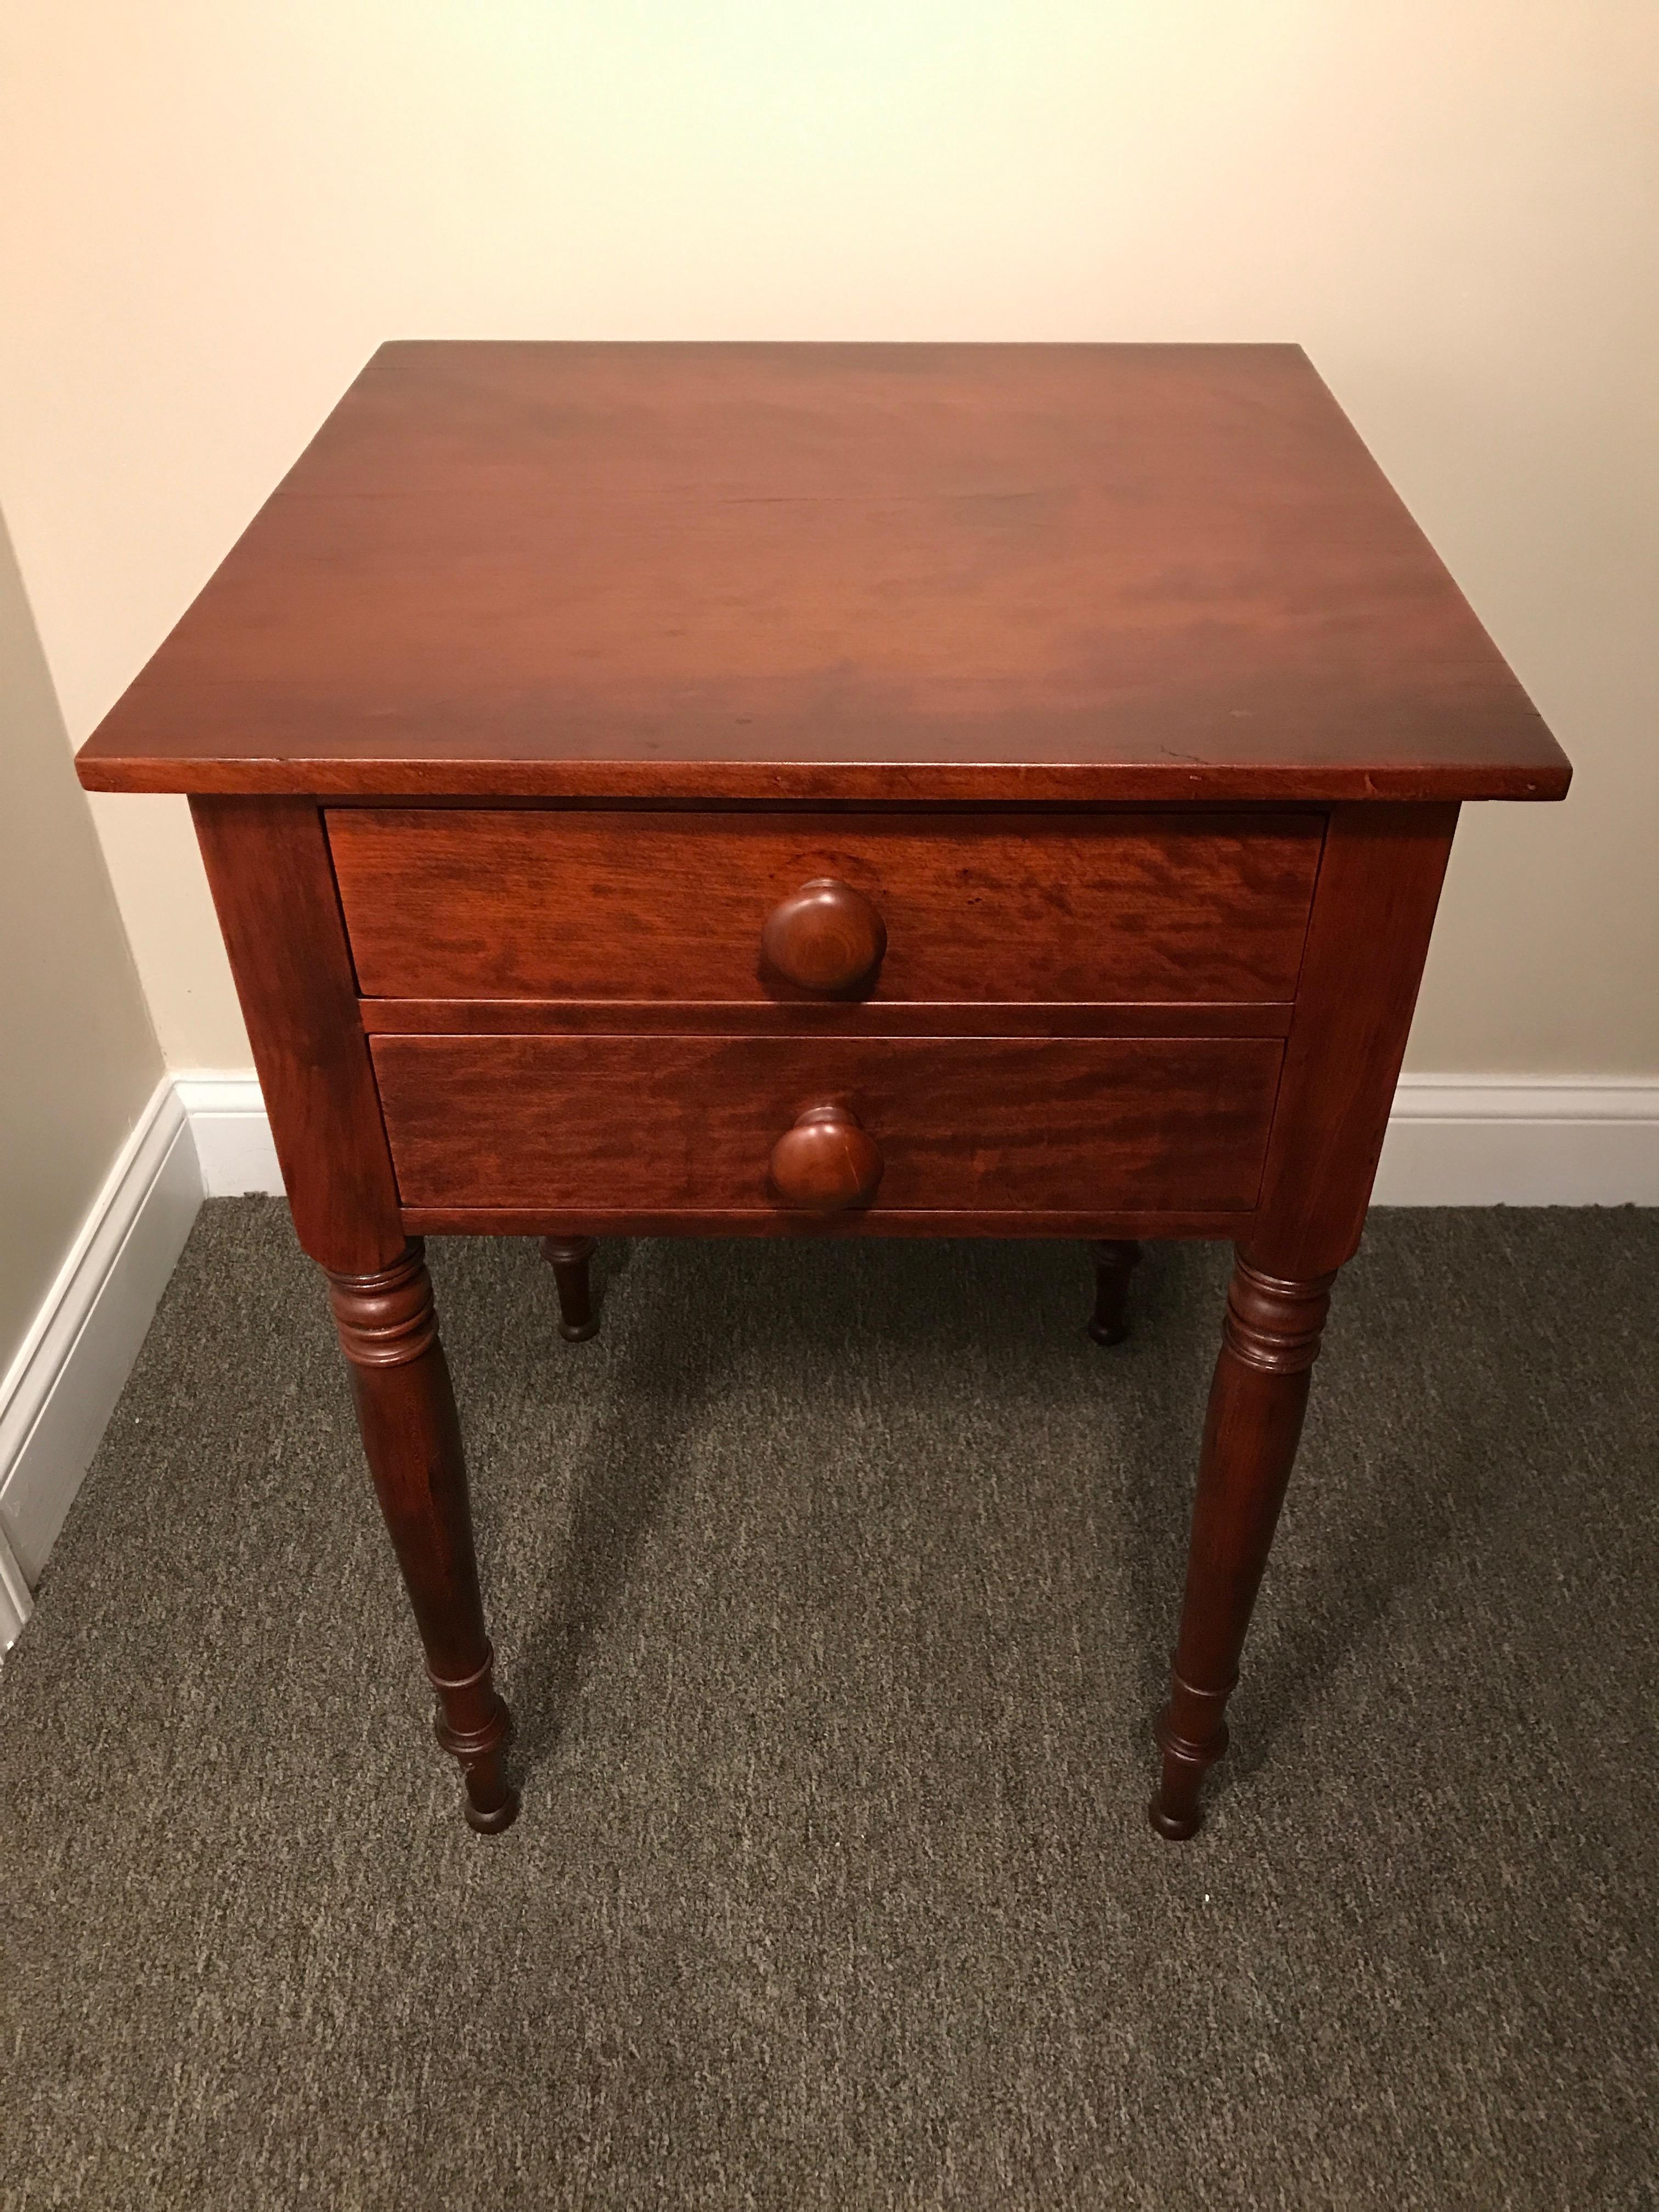 Sheraton 2-drawer stand in cherry, circa 1820 North shore, Massachusetts. Figured cherry drawers, turned legs, dovetailed drawers and wooden knobs. Recently refinished in our shop. A fine example of a Sheraton 2-drawer in cherry. Measures: 20